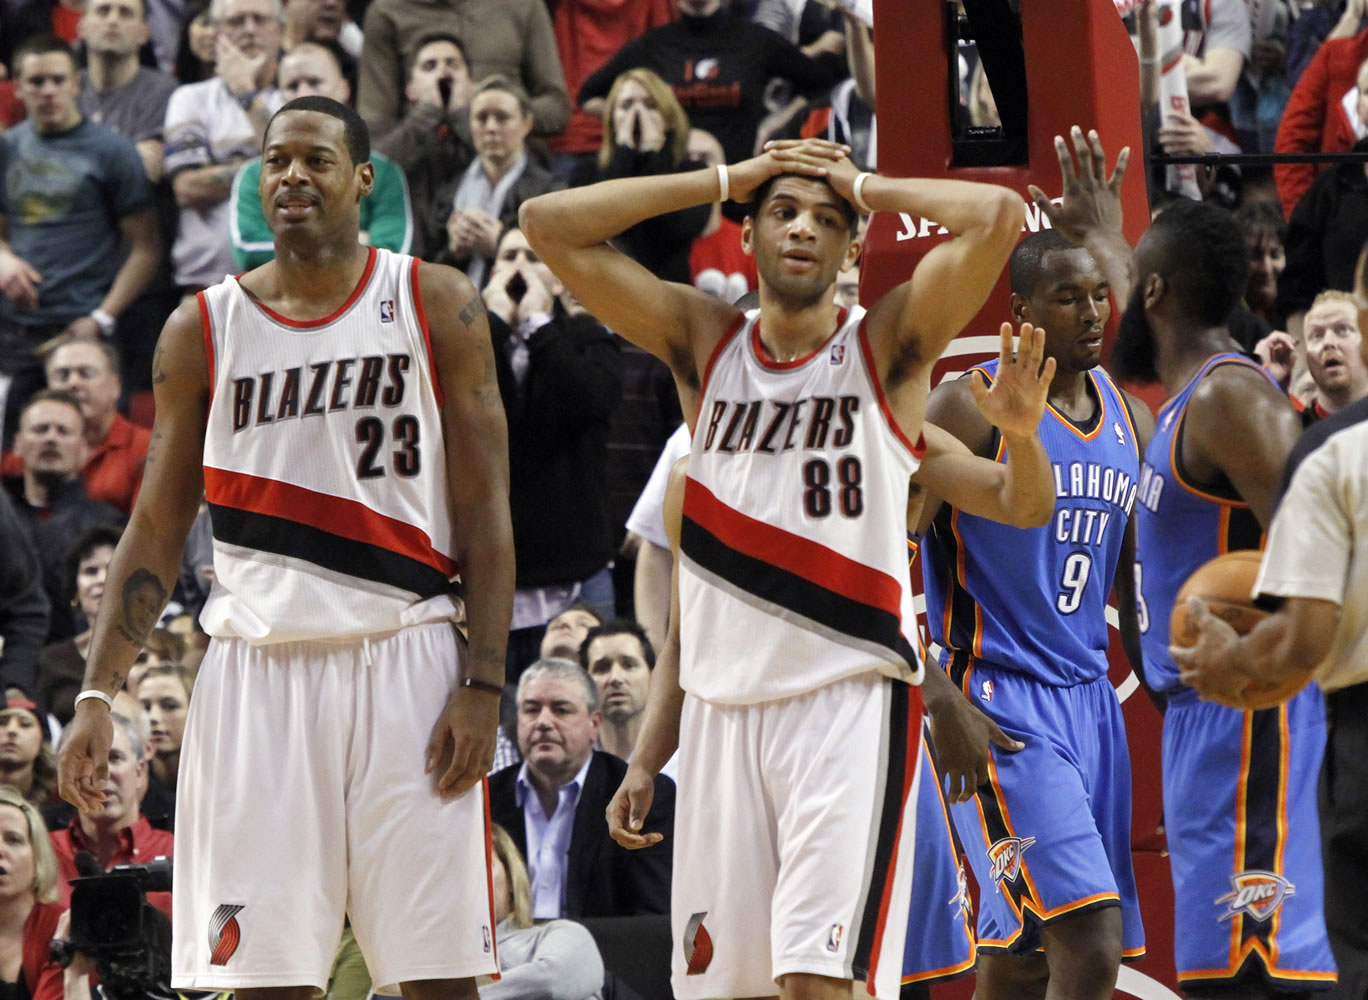 Portland Trail Blazers' Marcus Camby, left, and Nicolas Batum, from France, walk away after the Blazers were called for goaltending in overtime during their NBA basketball game against the Oklahoma City Thunder in Portland, Ore., Monday, Feb. 6, 2012.